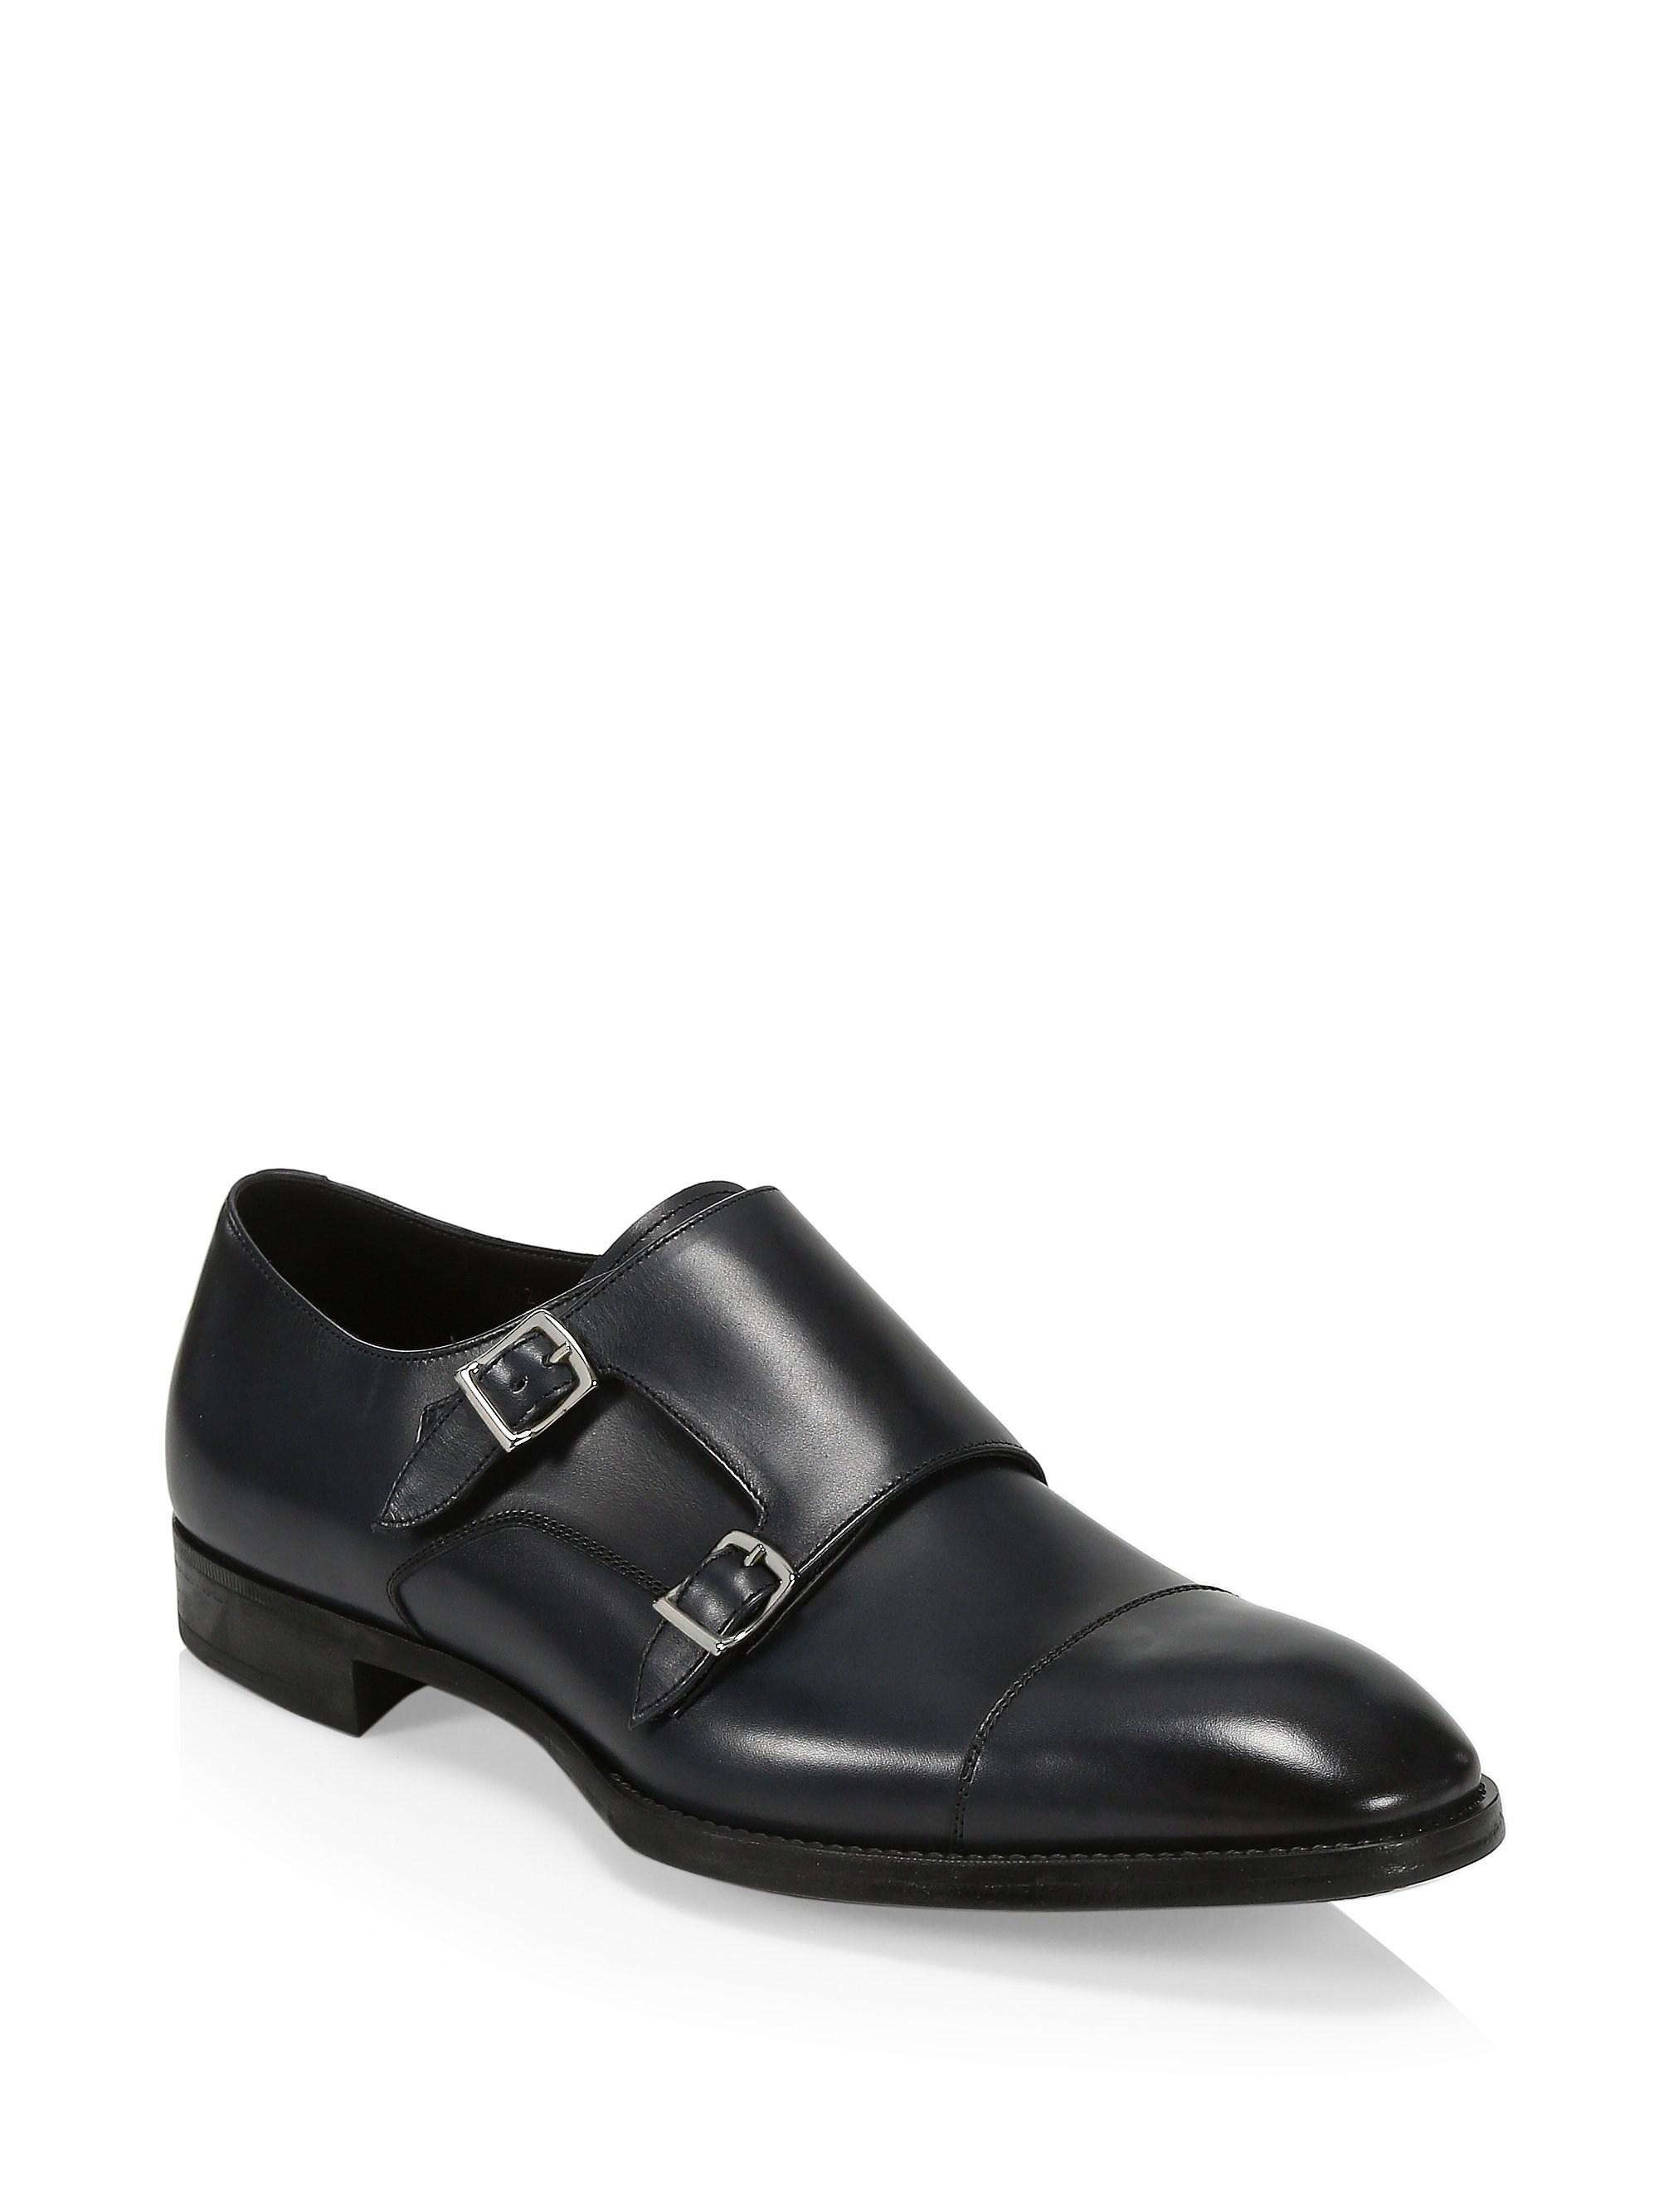 Giorgio Armani Leather Double-monk Strap Shoes in Black for Men | Lyst